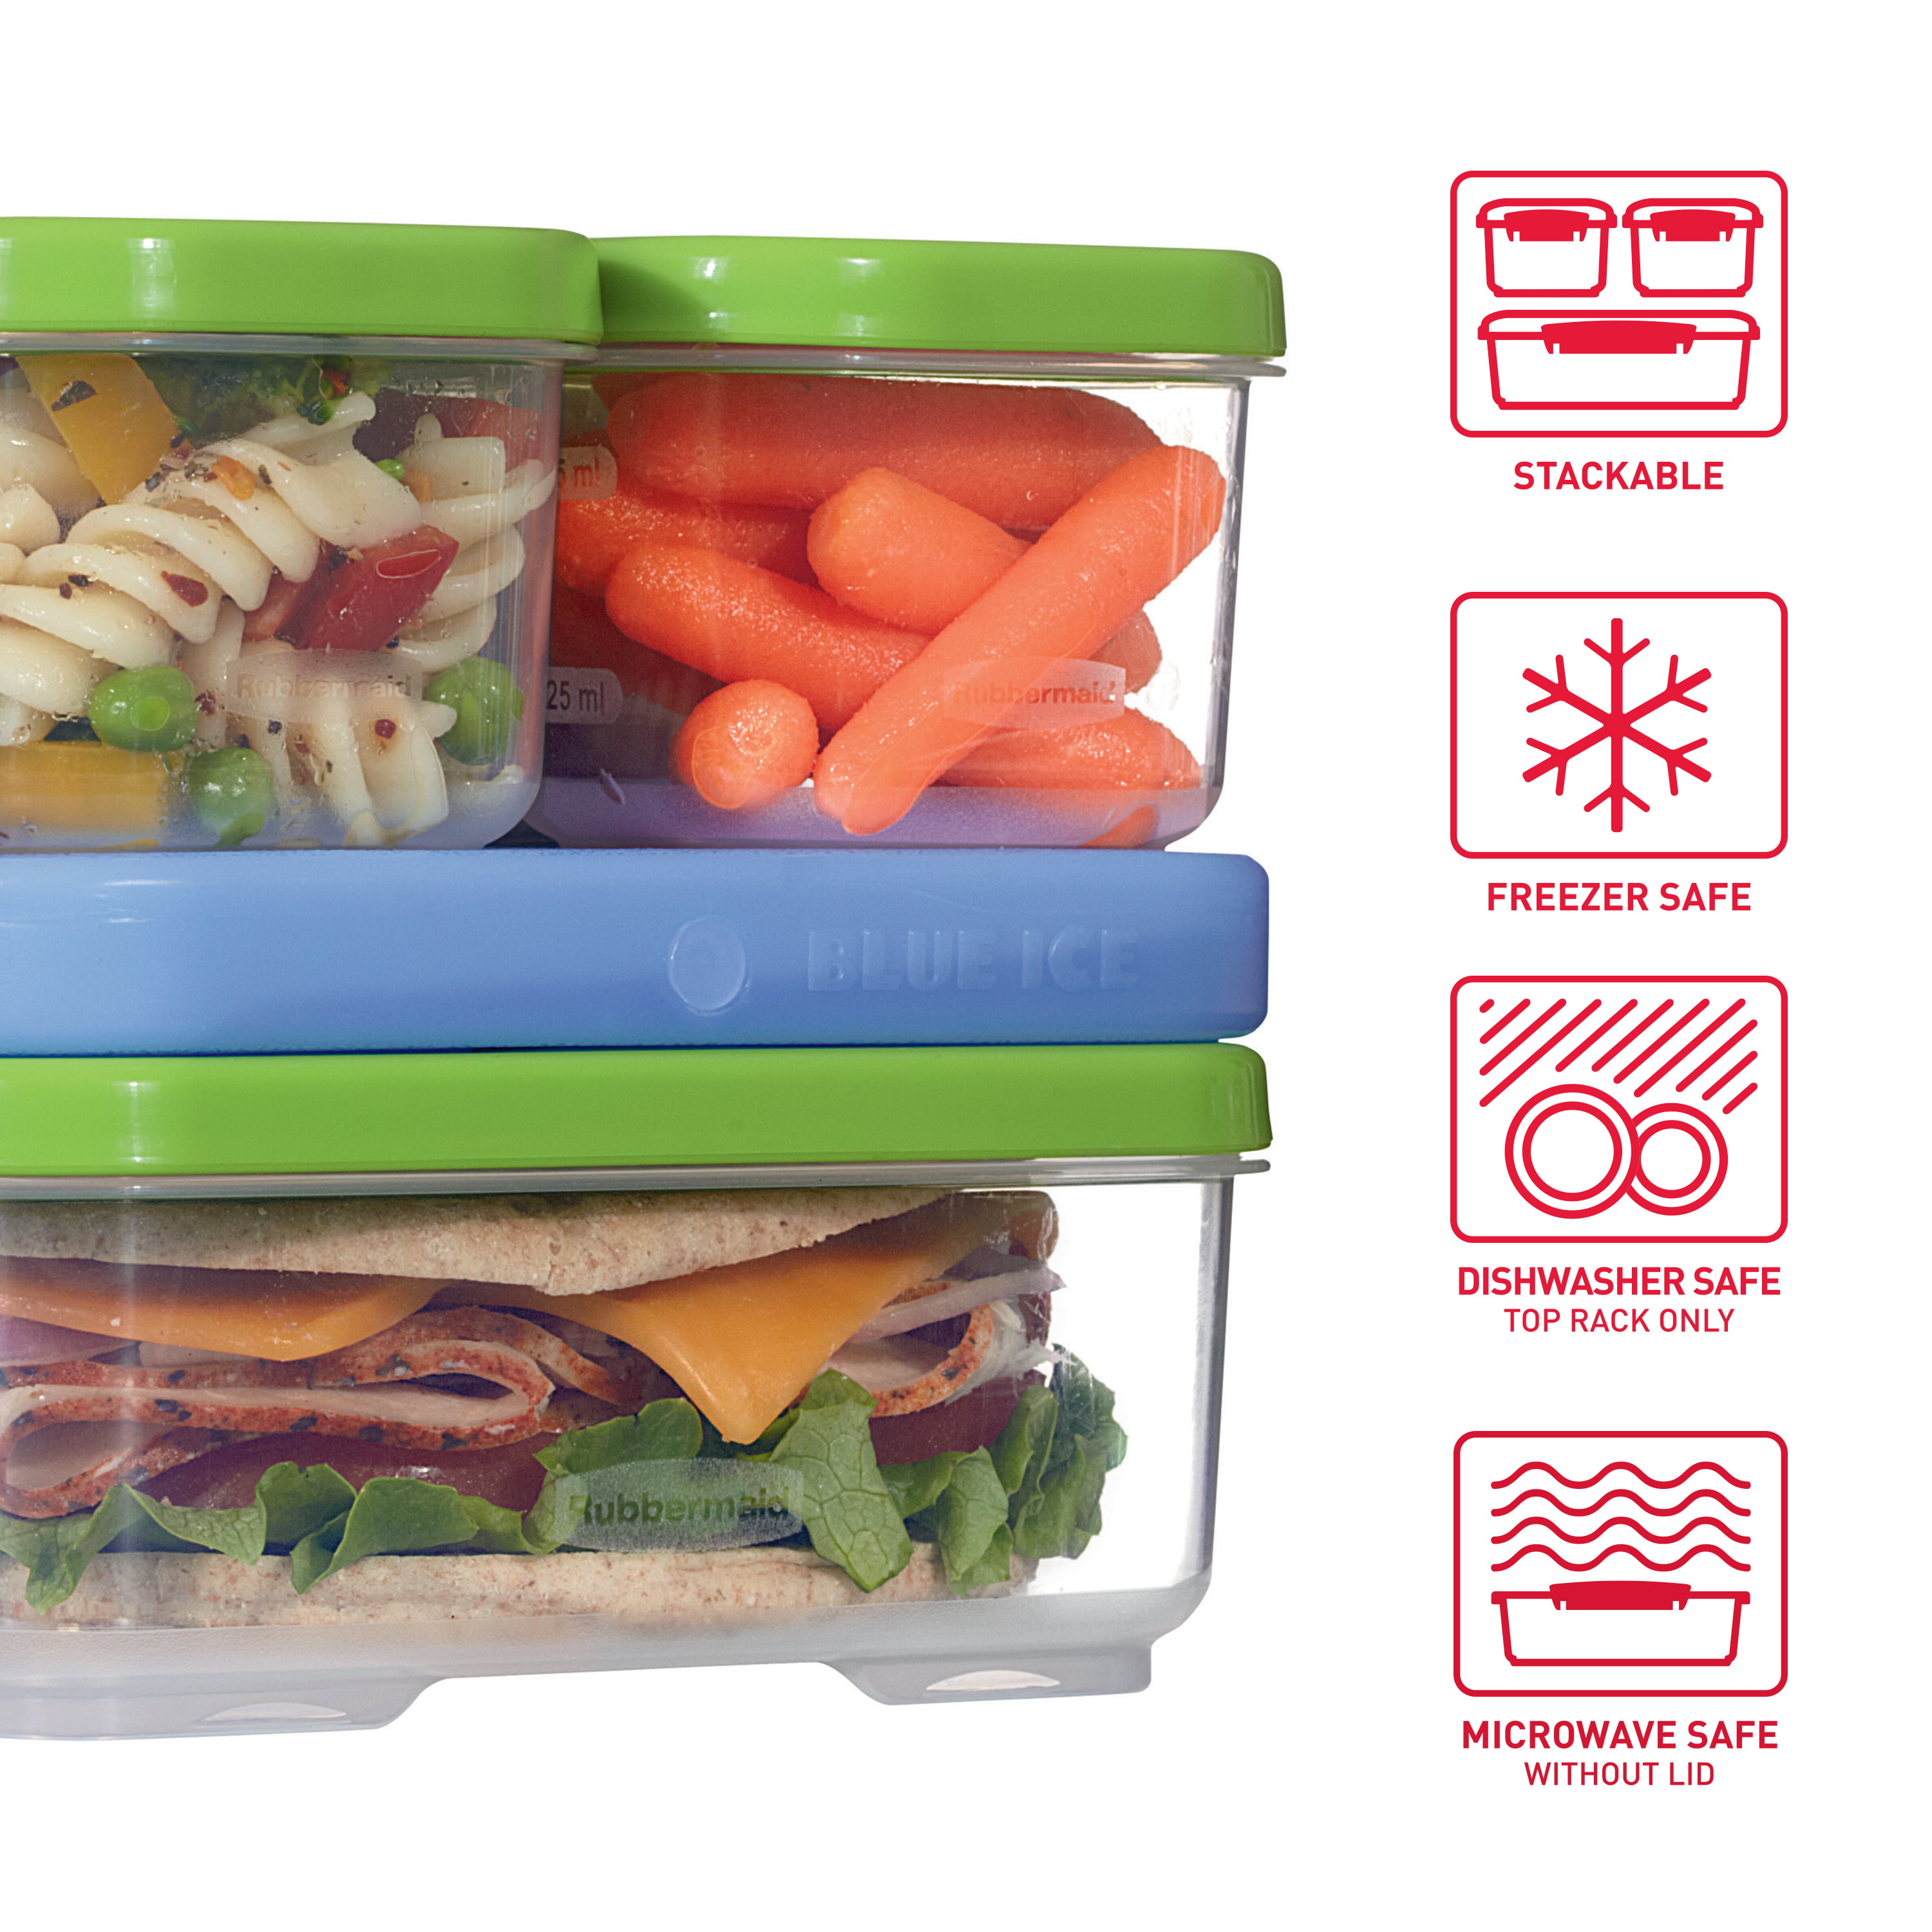 Back 2 School: Rubbermaid LunchBlox Kids Storage Container » The Denver  Housewife